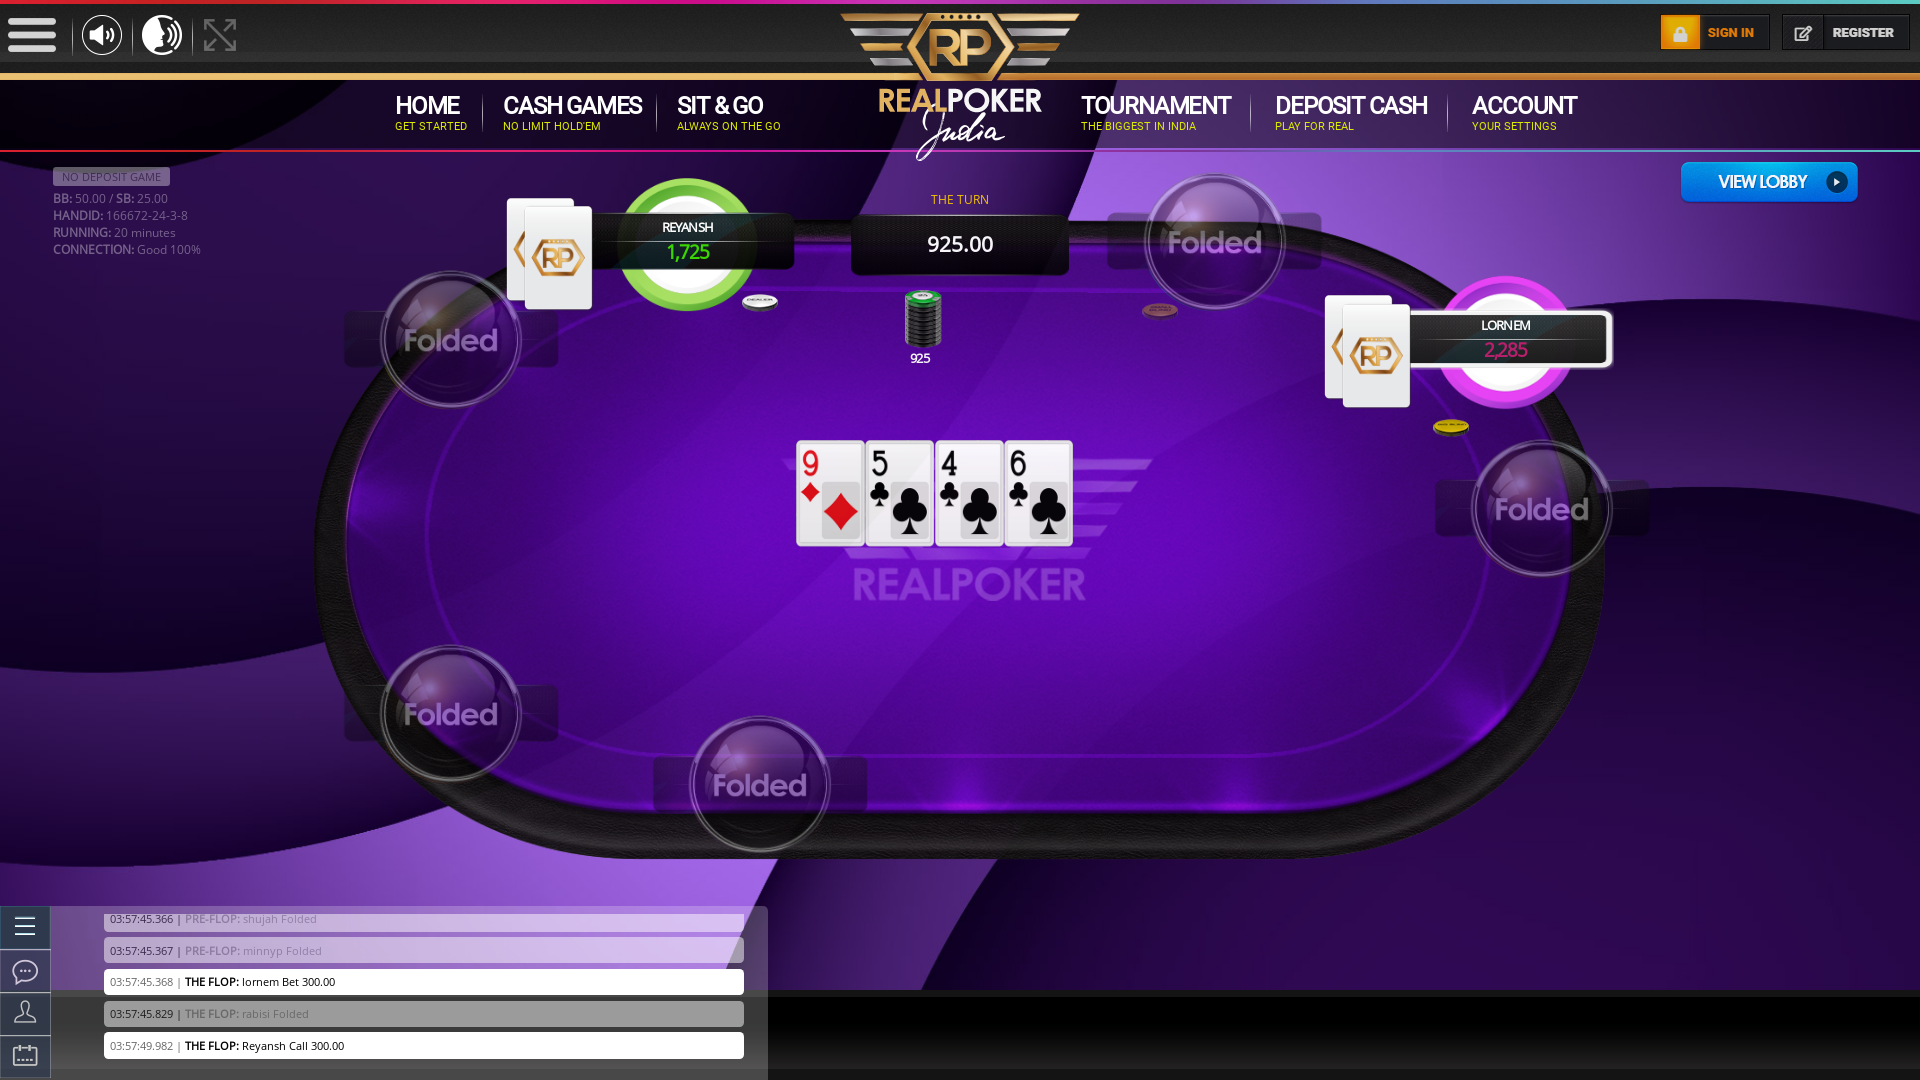 Indian 10 player poker in the 19th minute